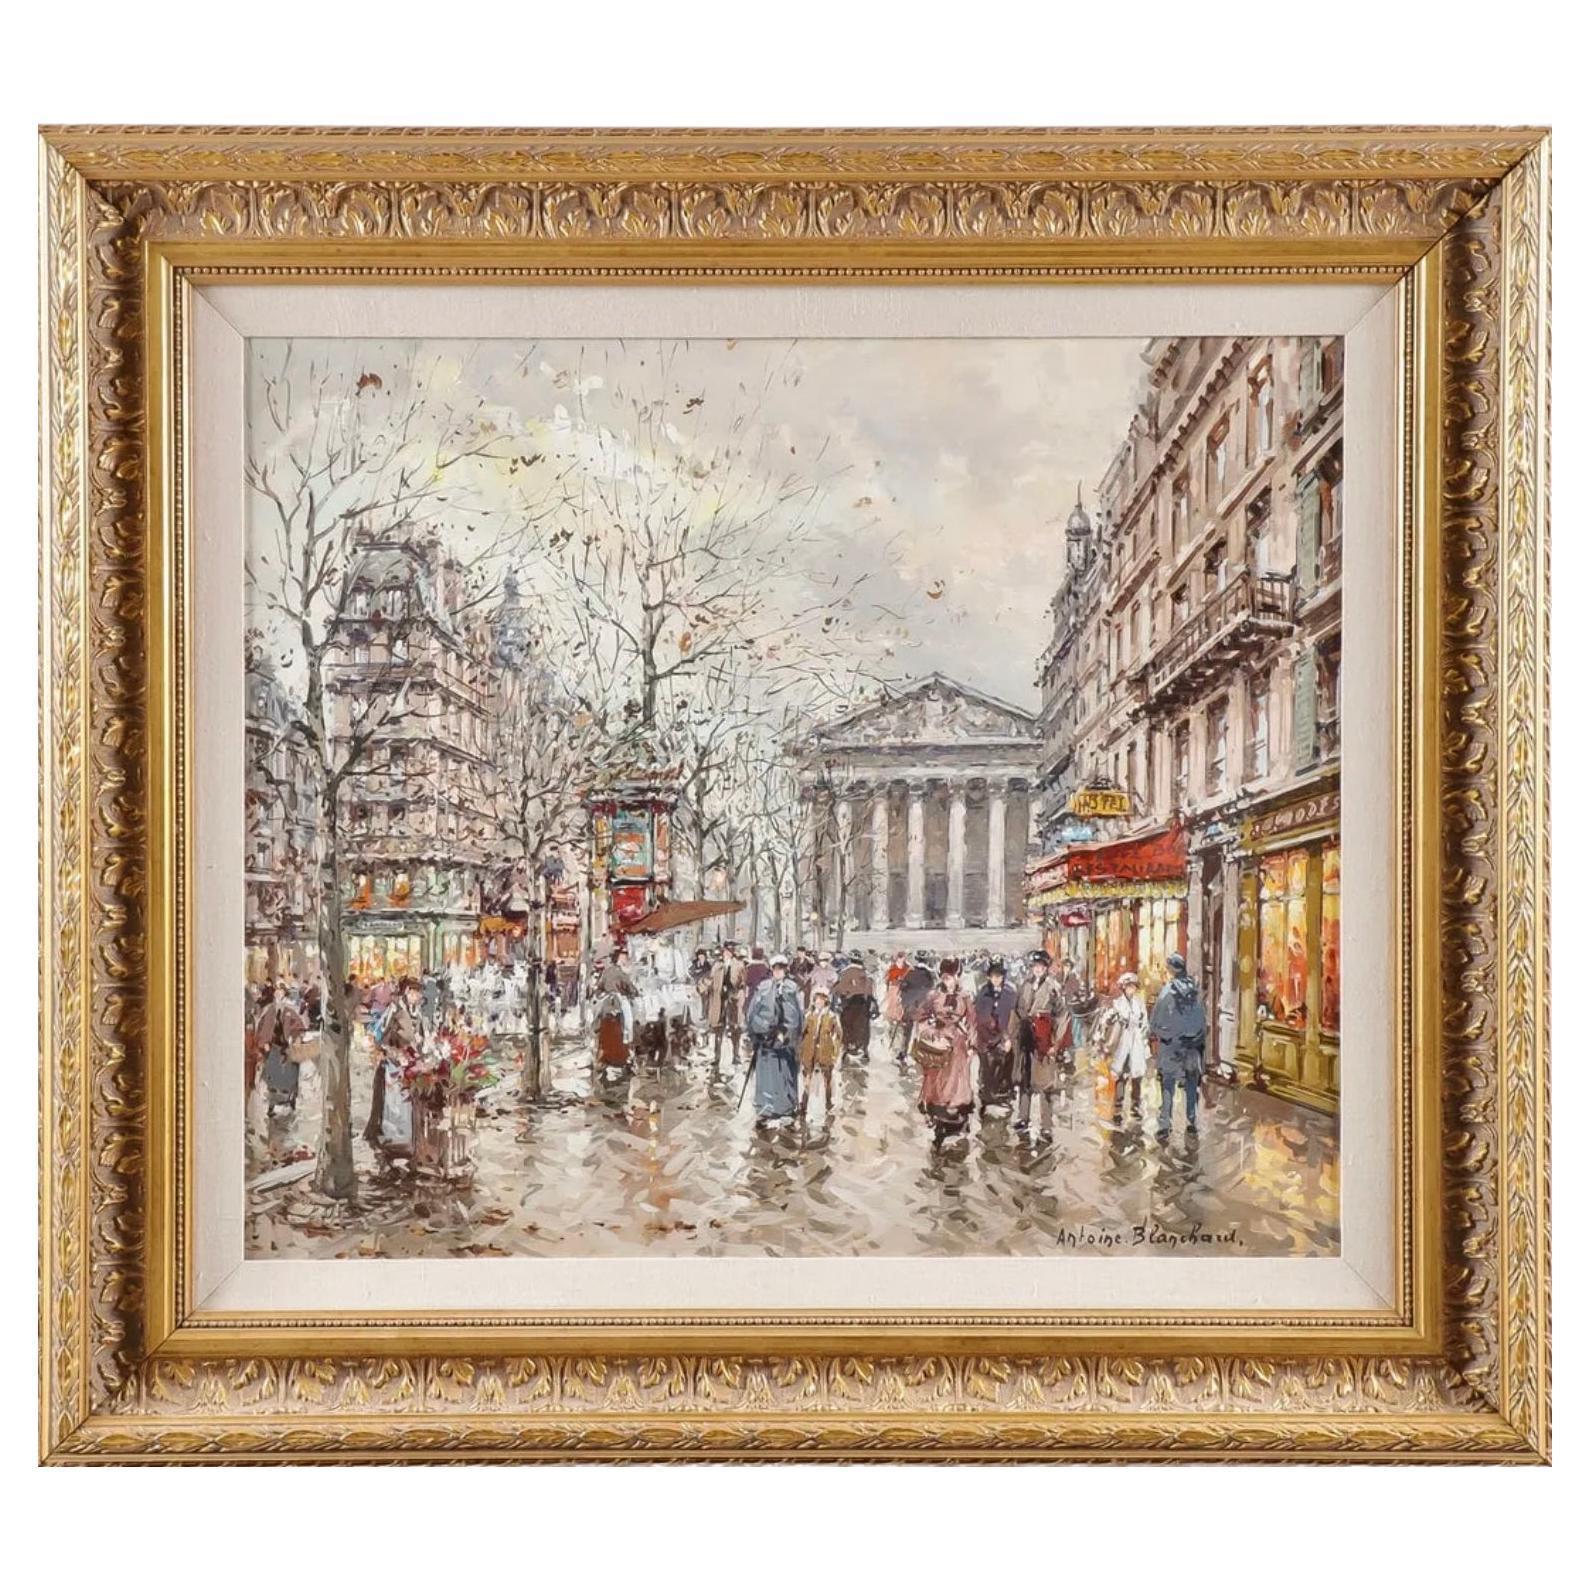 ANTOINE BLANCHARD (French 1910 - 1988)
La Rue Tronchet et la Madeleine 
Oil on canvas 
Circa 1980
Signed lower right and signed and titled on verso 
18 x 21.5 inches (47 x 54.5cm) 

A COA (Certificate of Authenticity) by REHs Galleries will